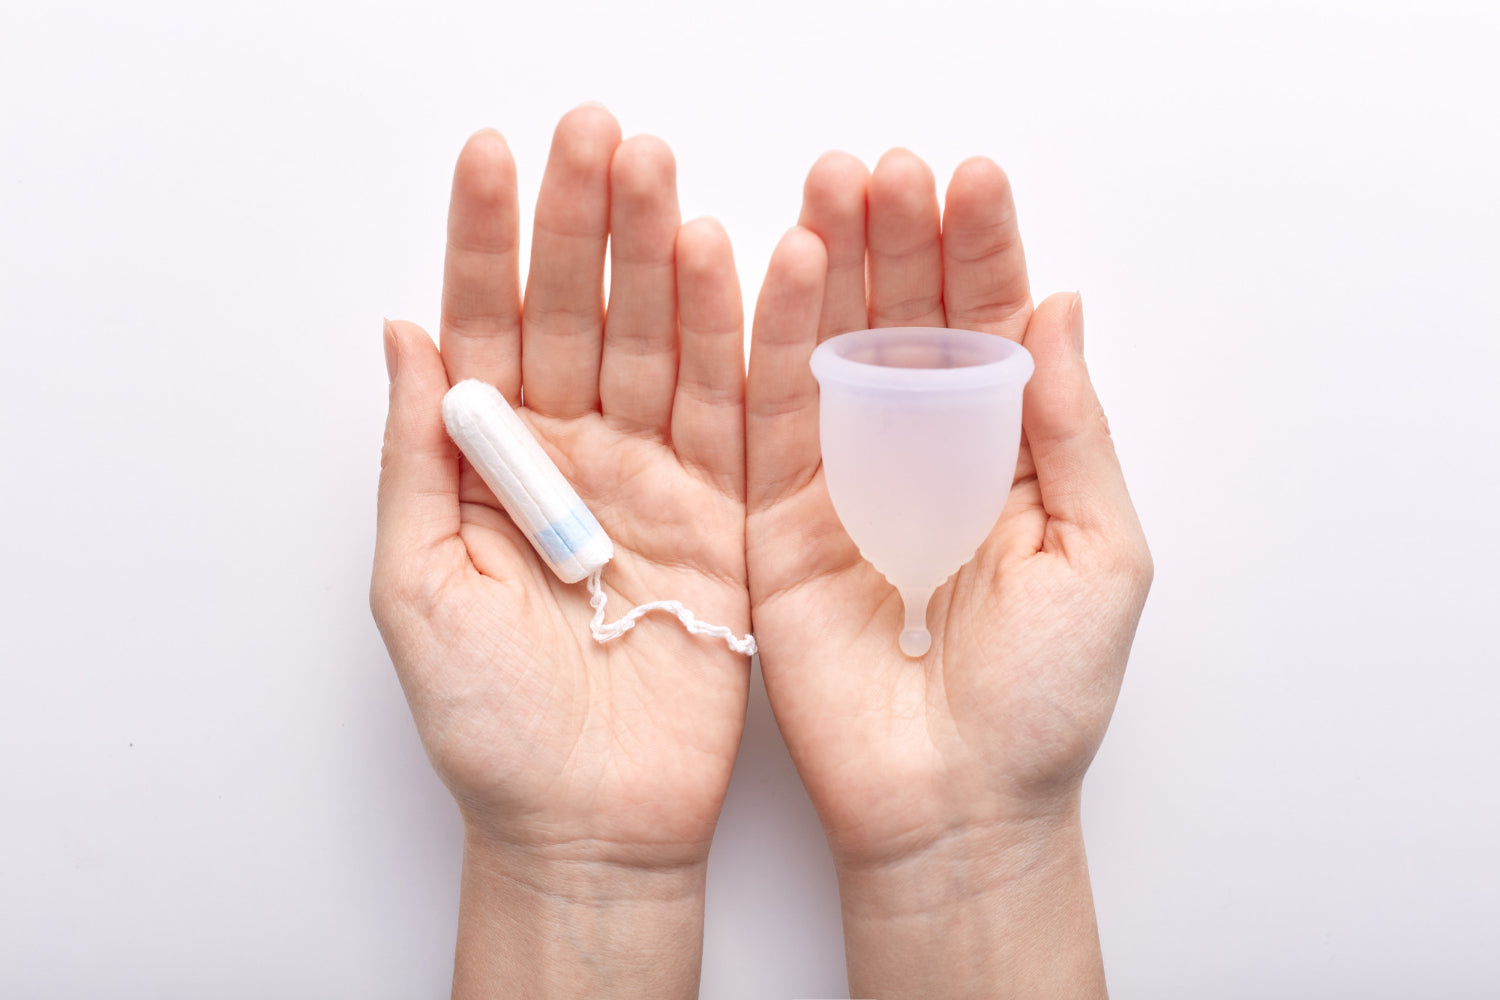 Tampon, Pad, Menstrual Cup or Period pants? What is the healthiest option?  - Kirsty Eng